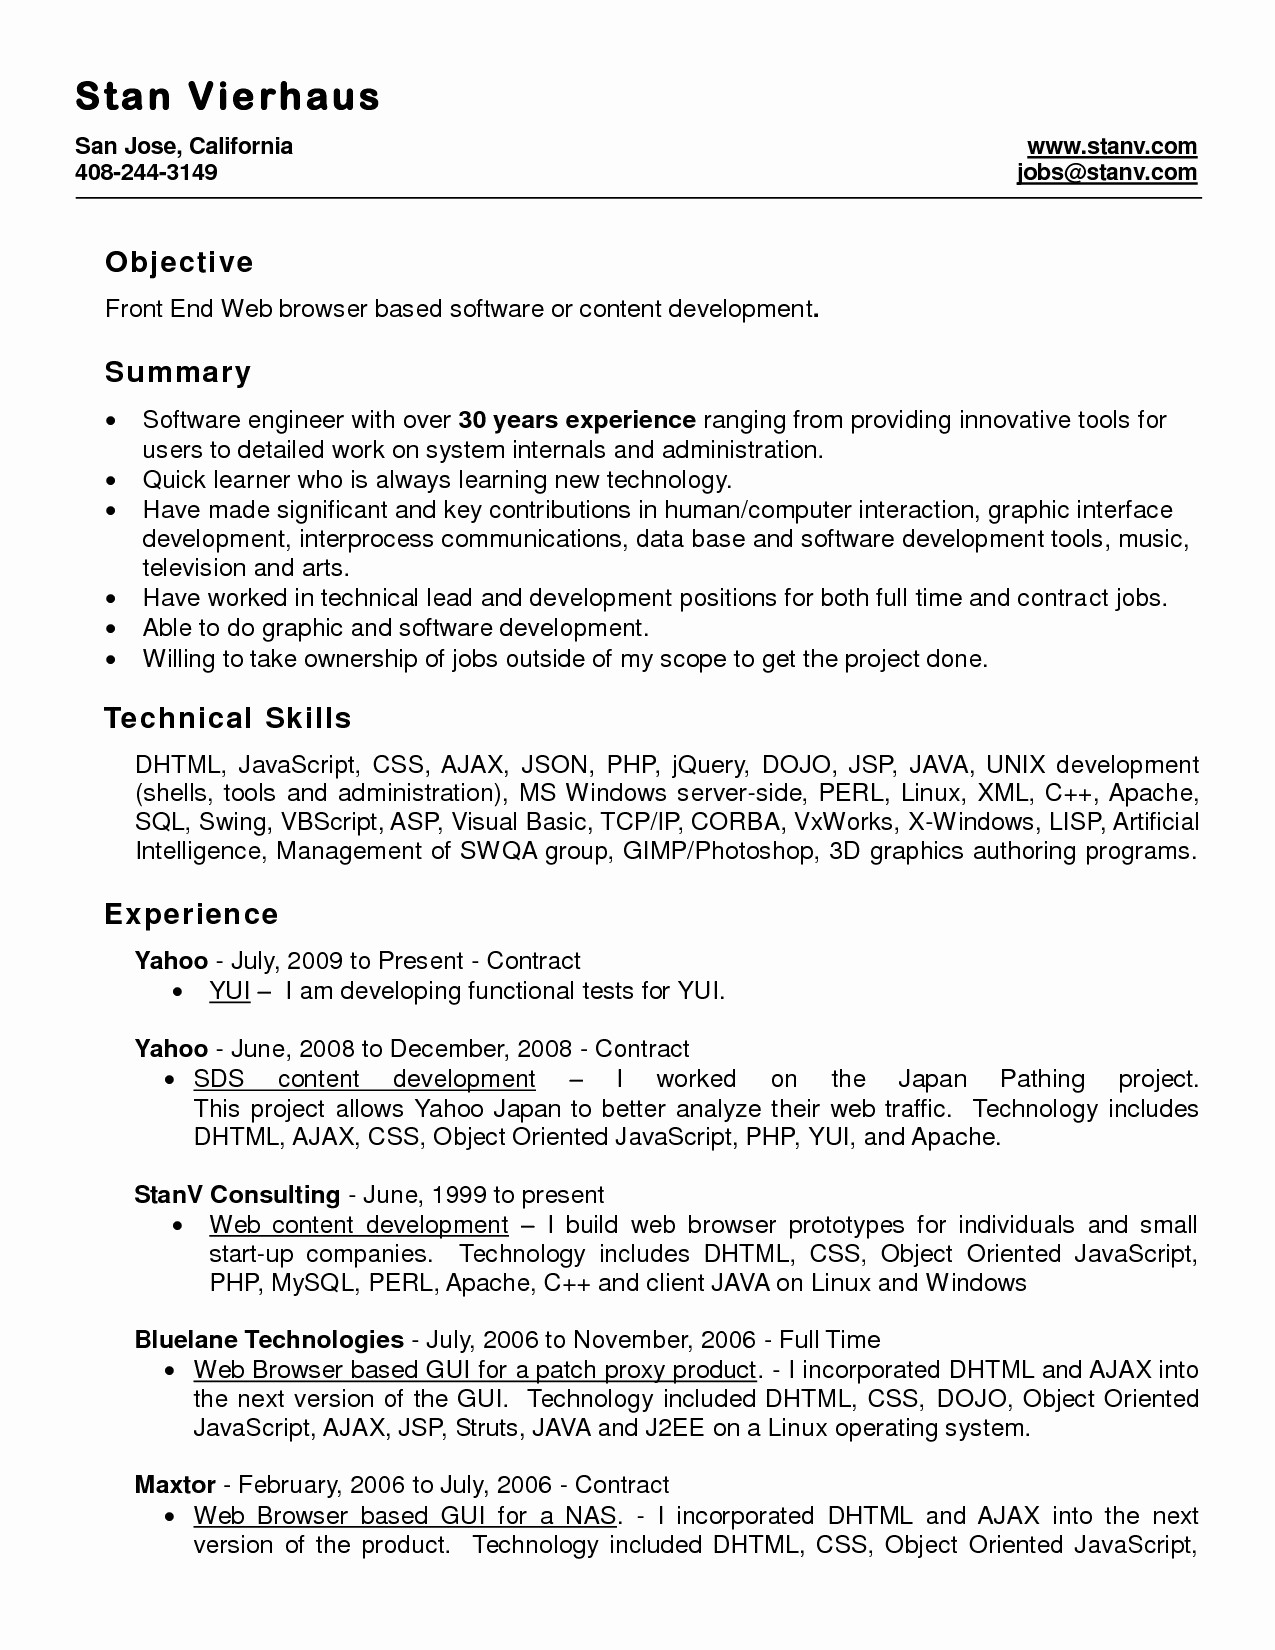 Ms Office Word Resume Templates Awesome Resume Template Microsoft Word 2017